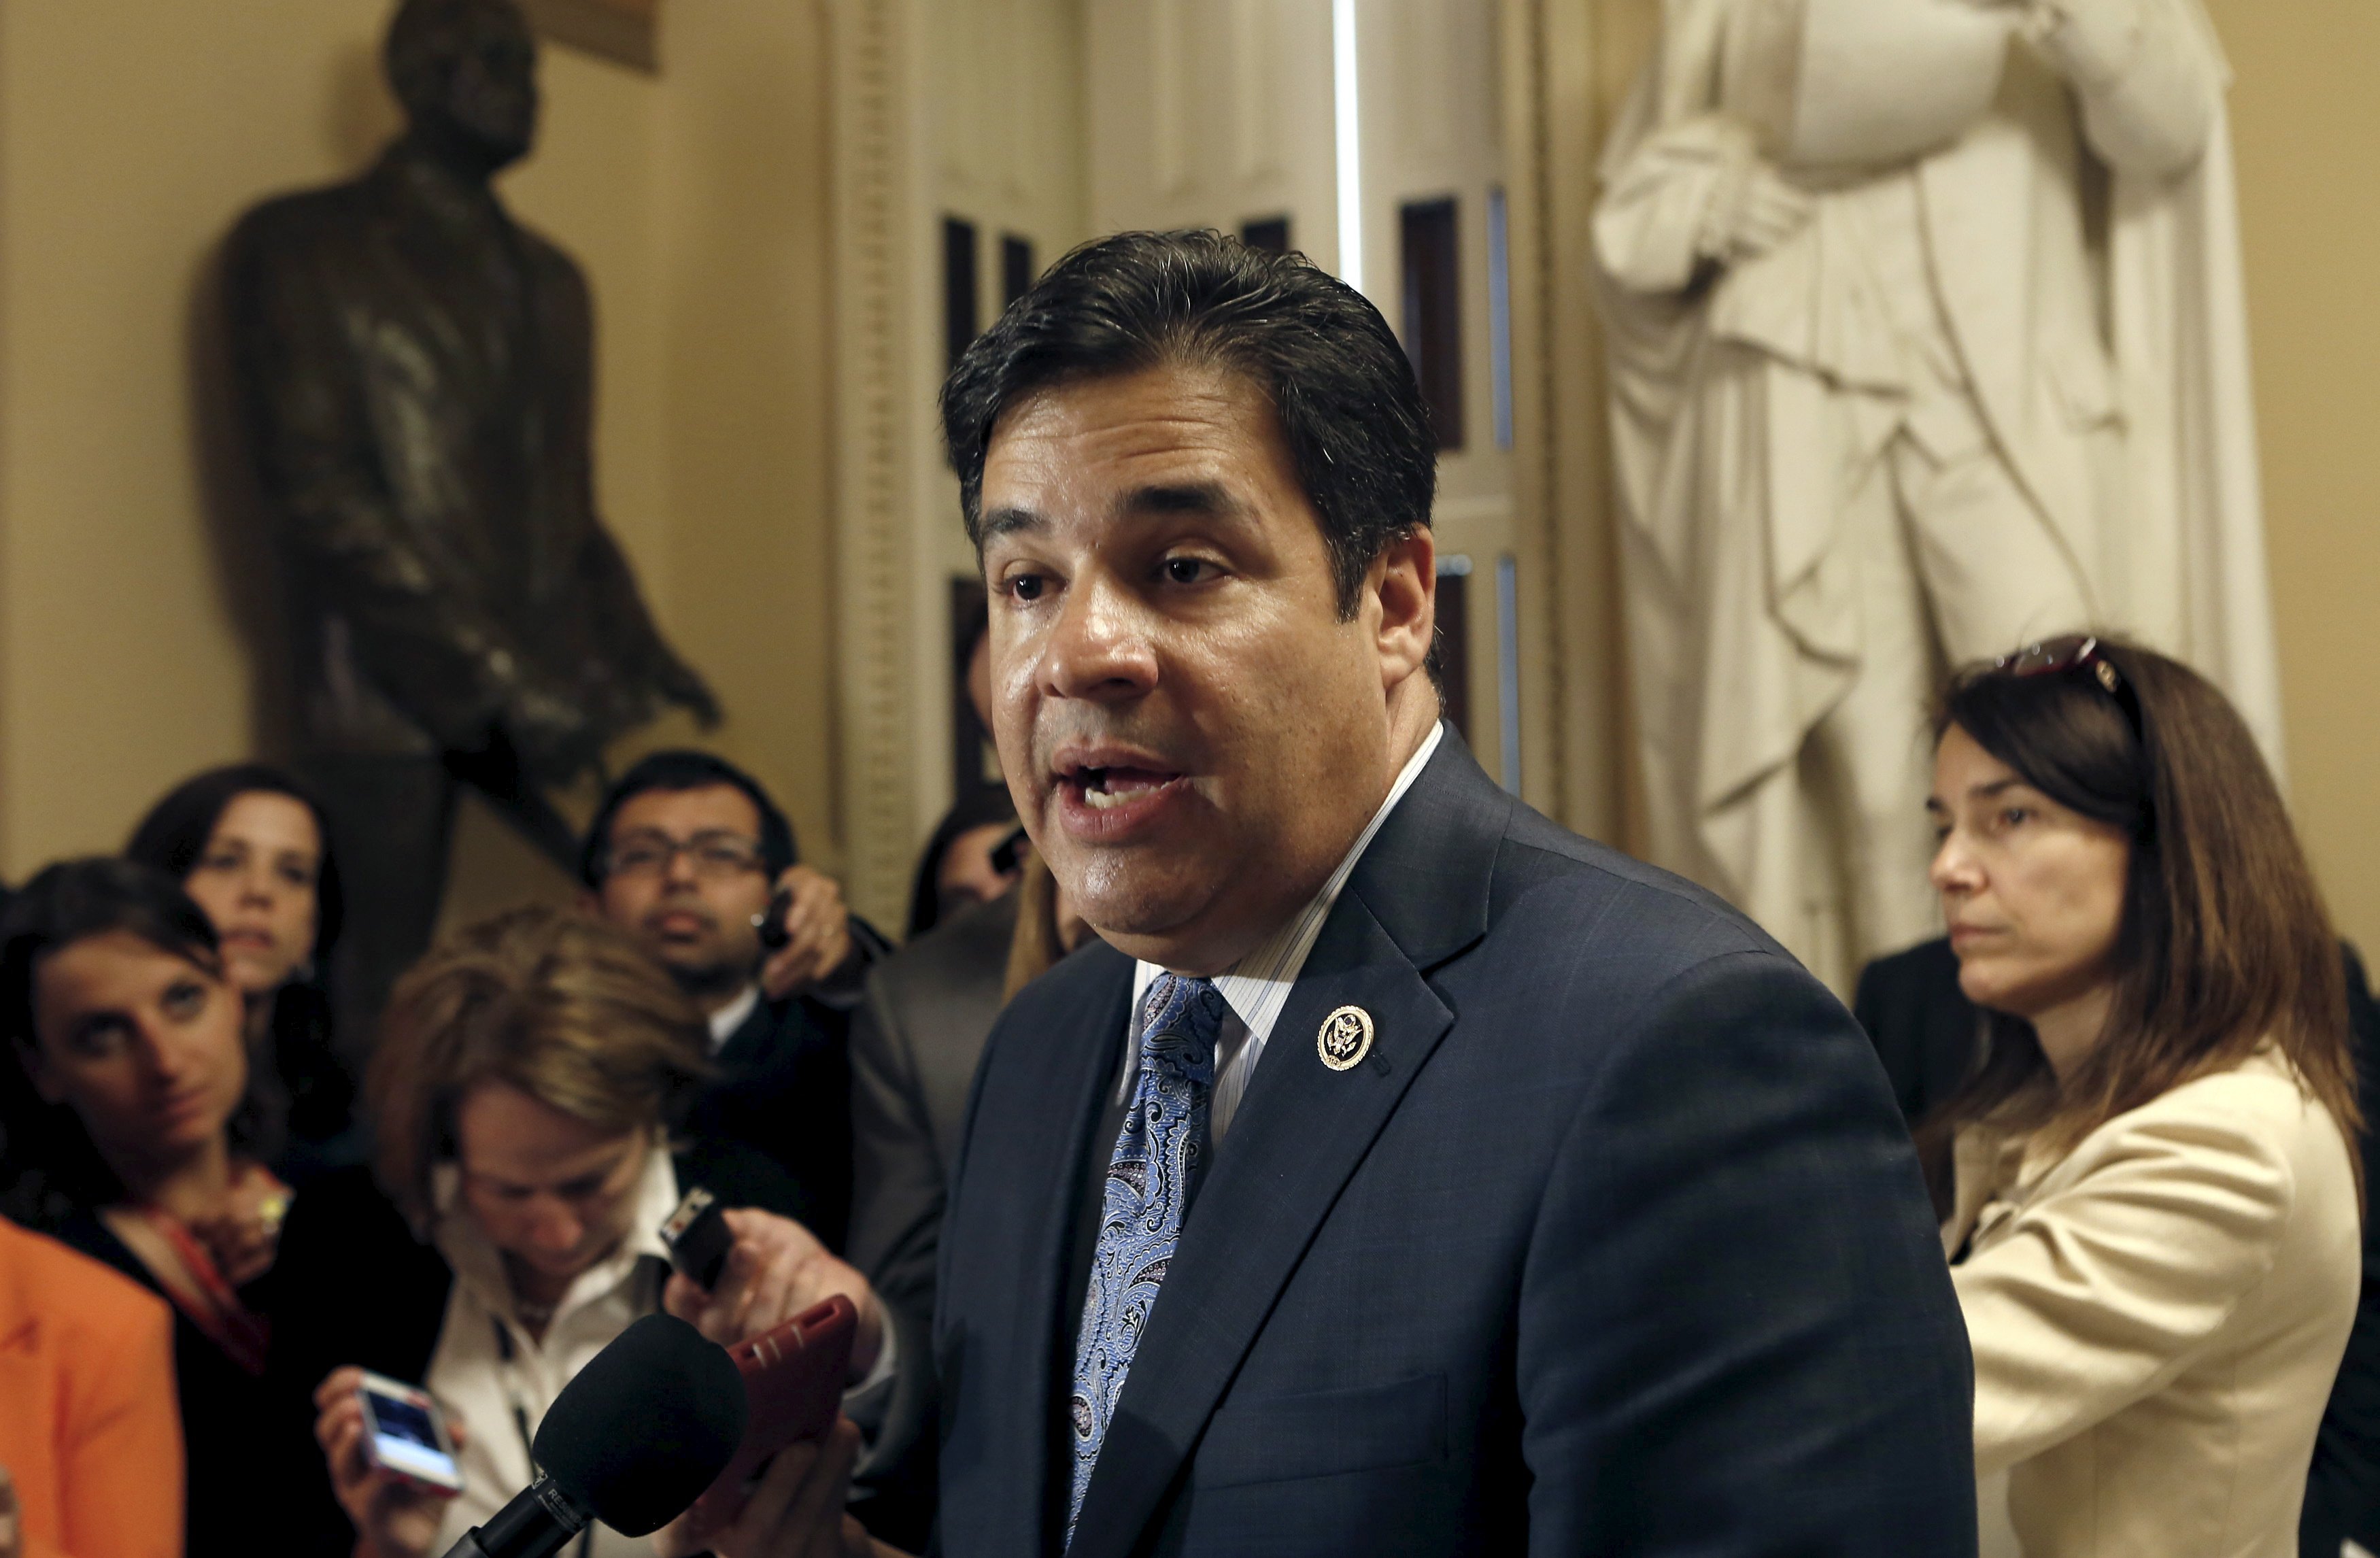 U.S. Representative Raul Labrador talks to the media about U.S. Representative Paul Ryan after the House Freedom Caucus meeting on Capitol Hill in Washington